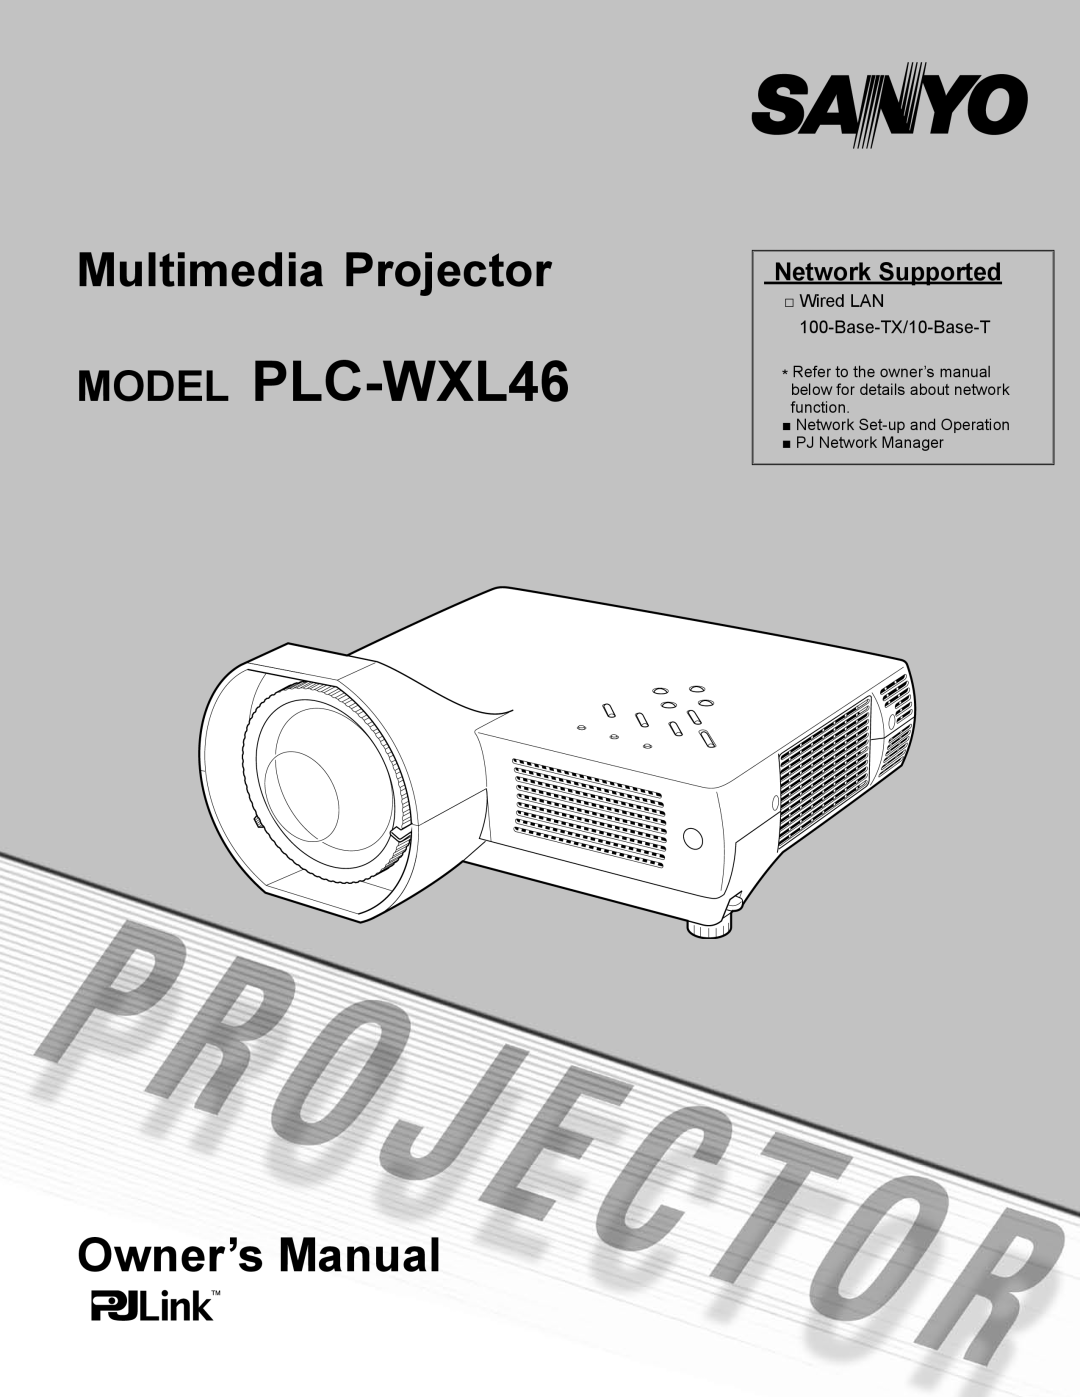 Sanyo owner manual Network Supported, MODEL PLC-WXL46, Multimedia Projector 